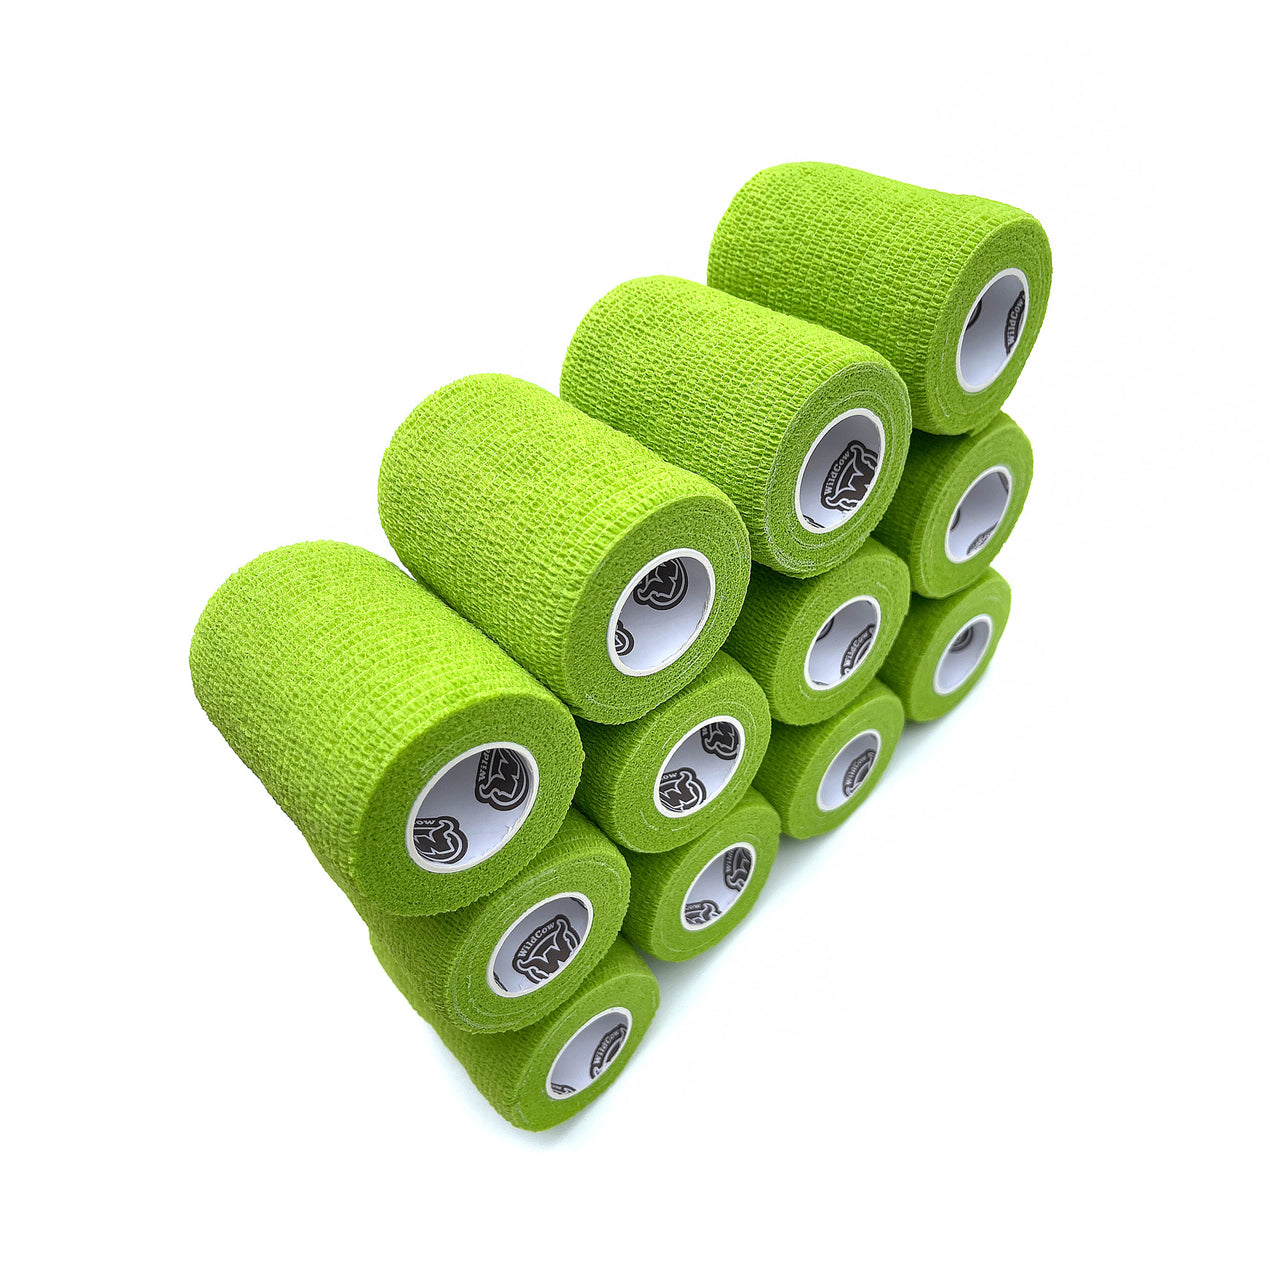 12 Pack of WildCow 3 Inch Grass Green Vet Wrap